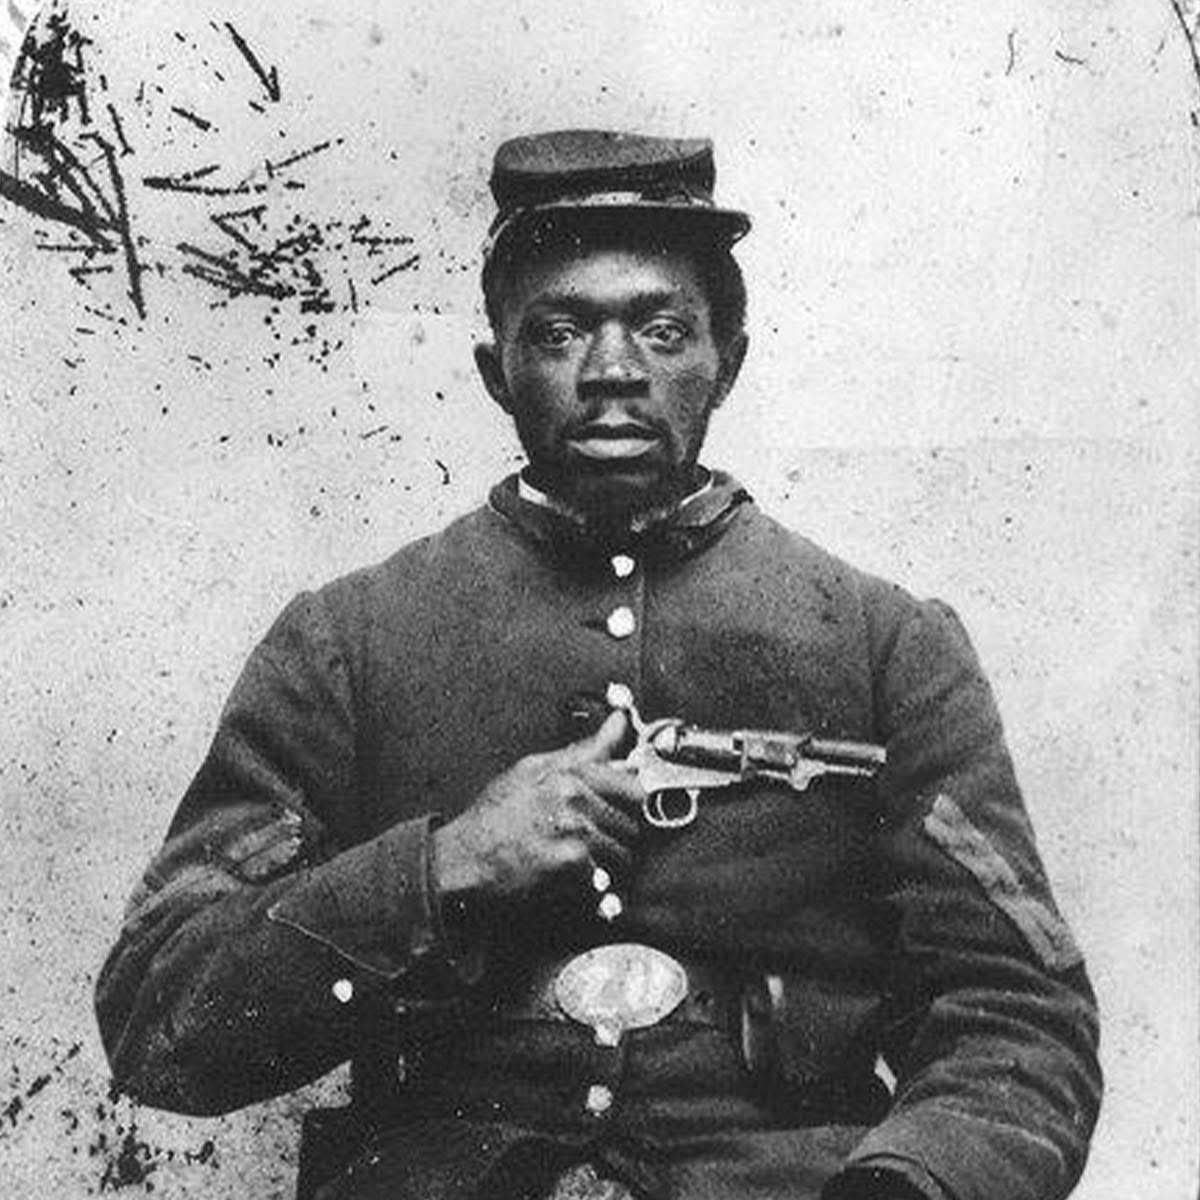 During the Civil War, many former male slaves in the Clarksville area signed up to fight for their freedom as part of the Union Army. They were known as the United States Colored Troops.